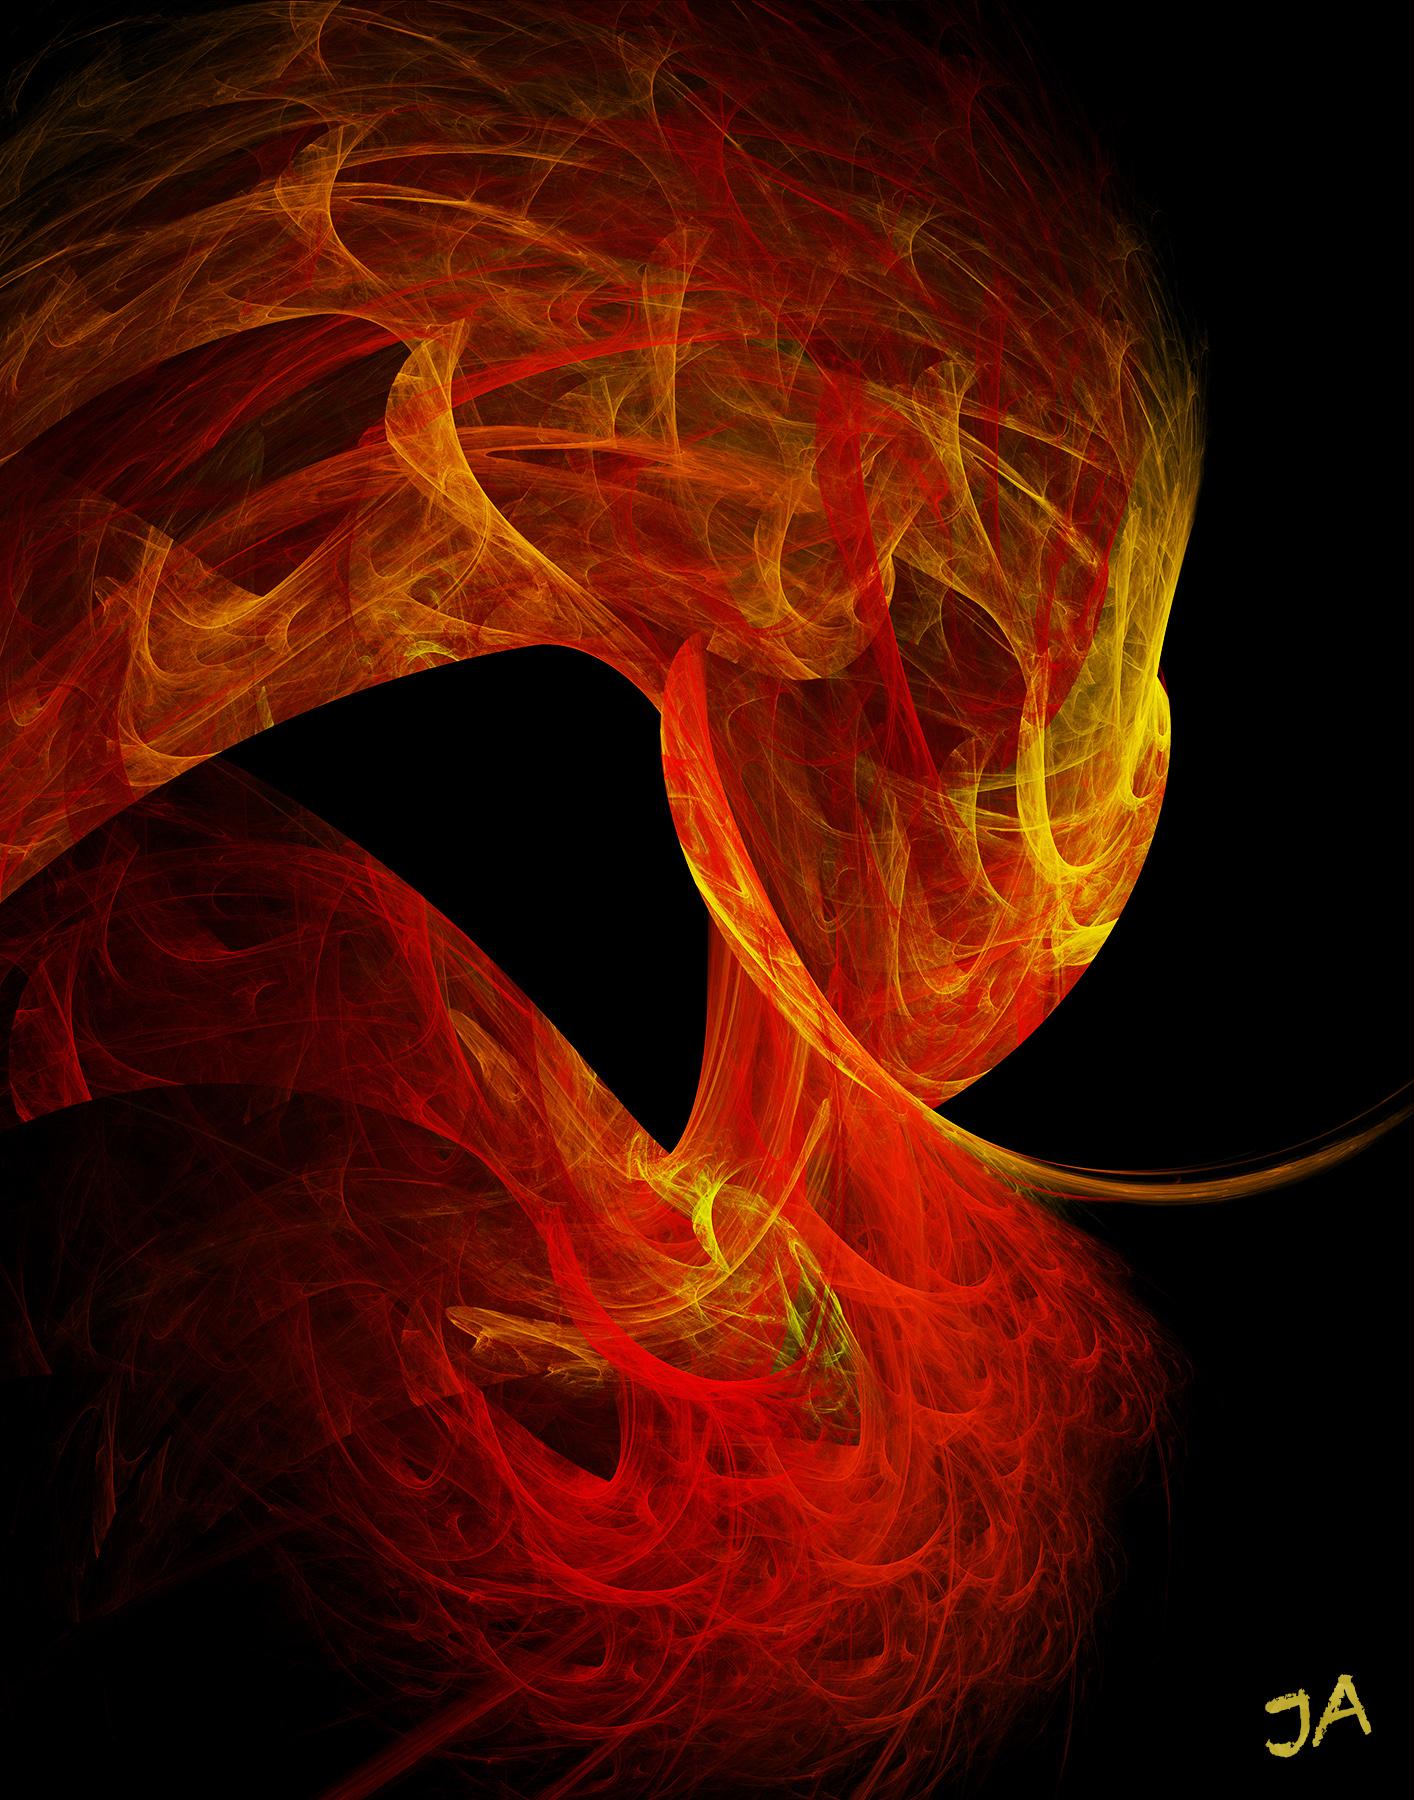 Image for entry 'Flames'